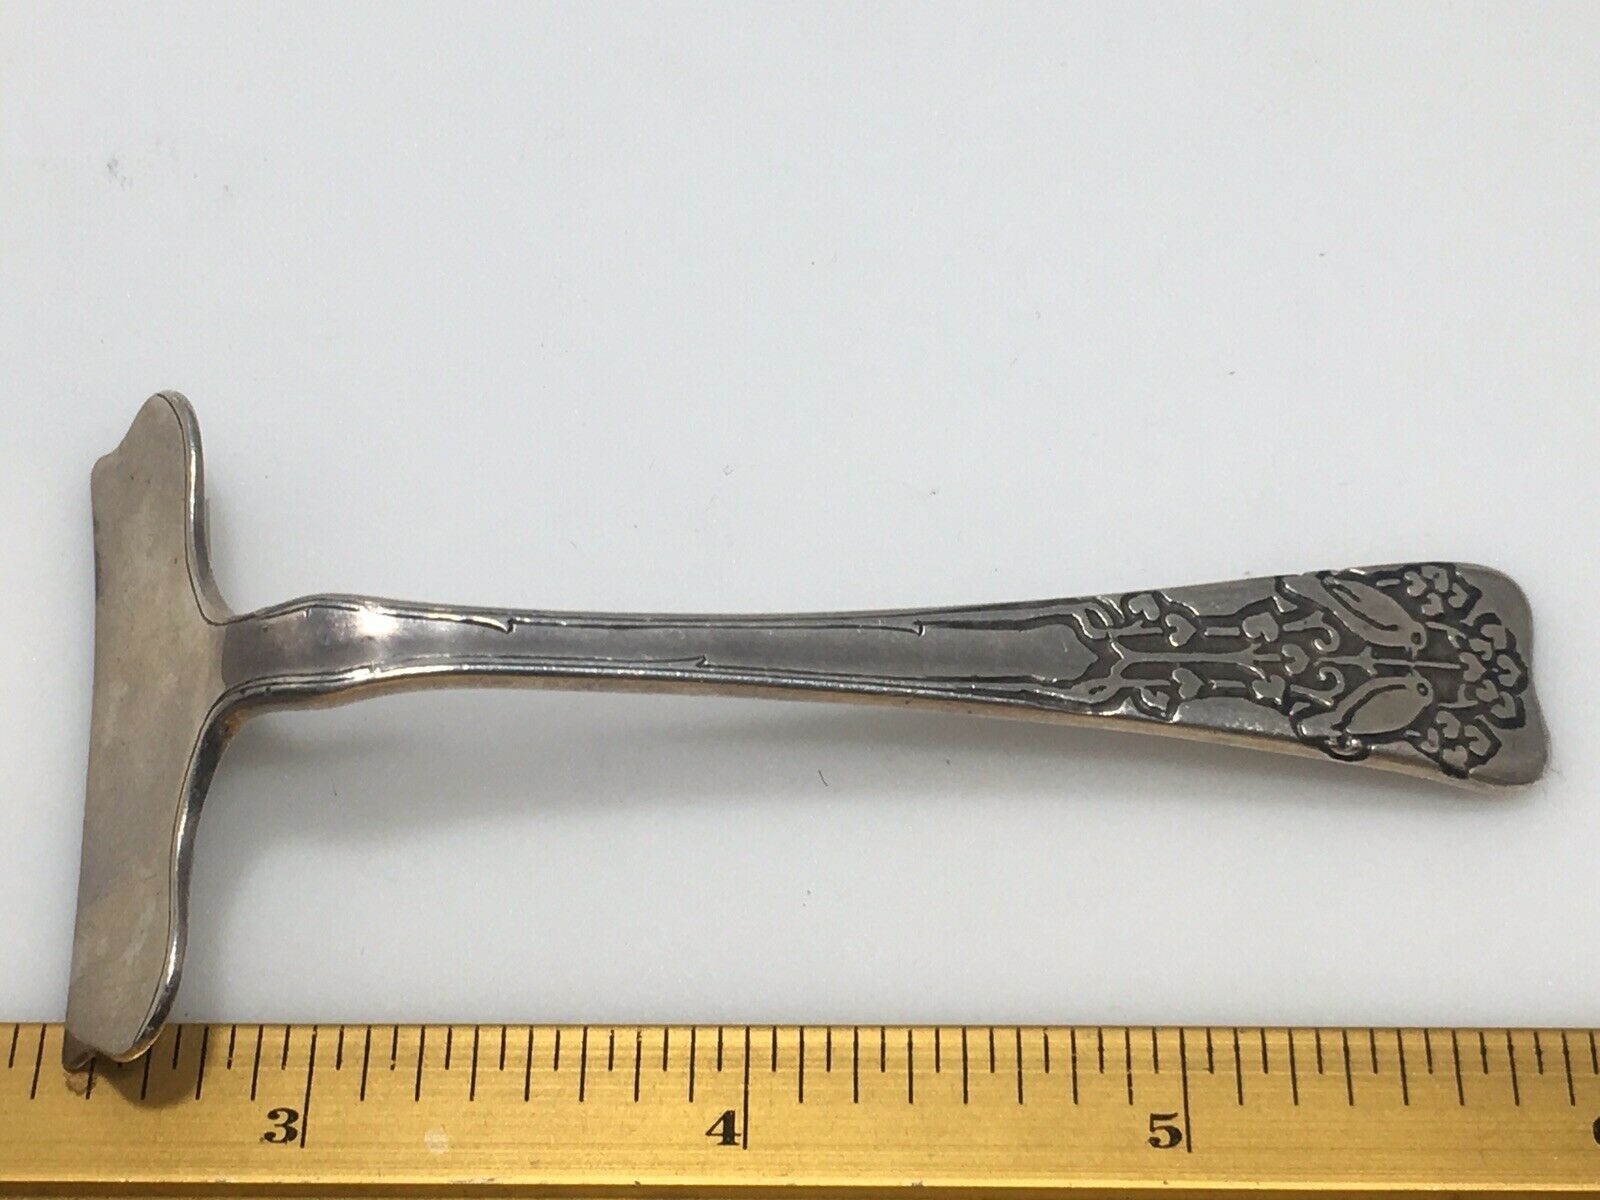 Tiffany & Co Sterling Silver C 1880 Lap Over Edge Etxhed Baby Pusher. Very rare